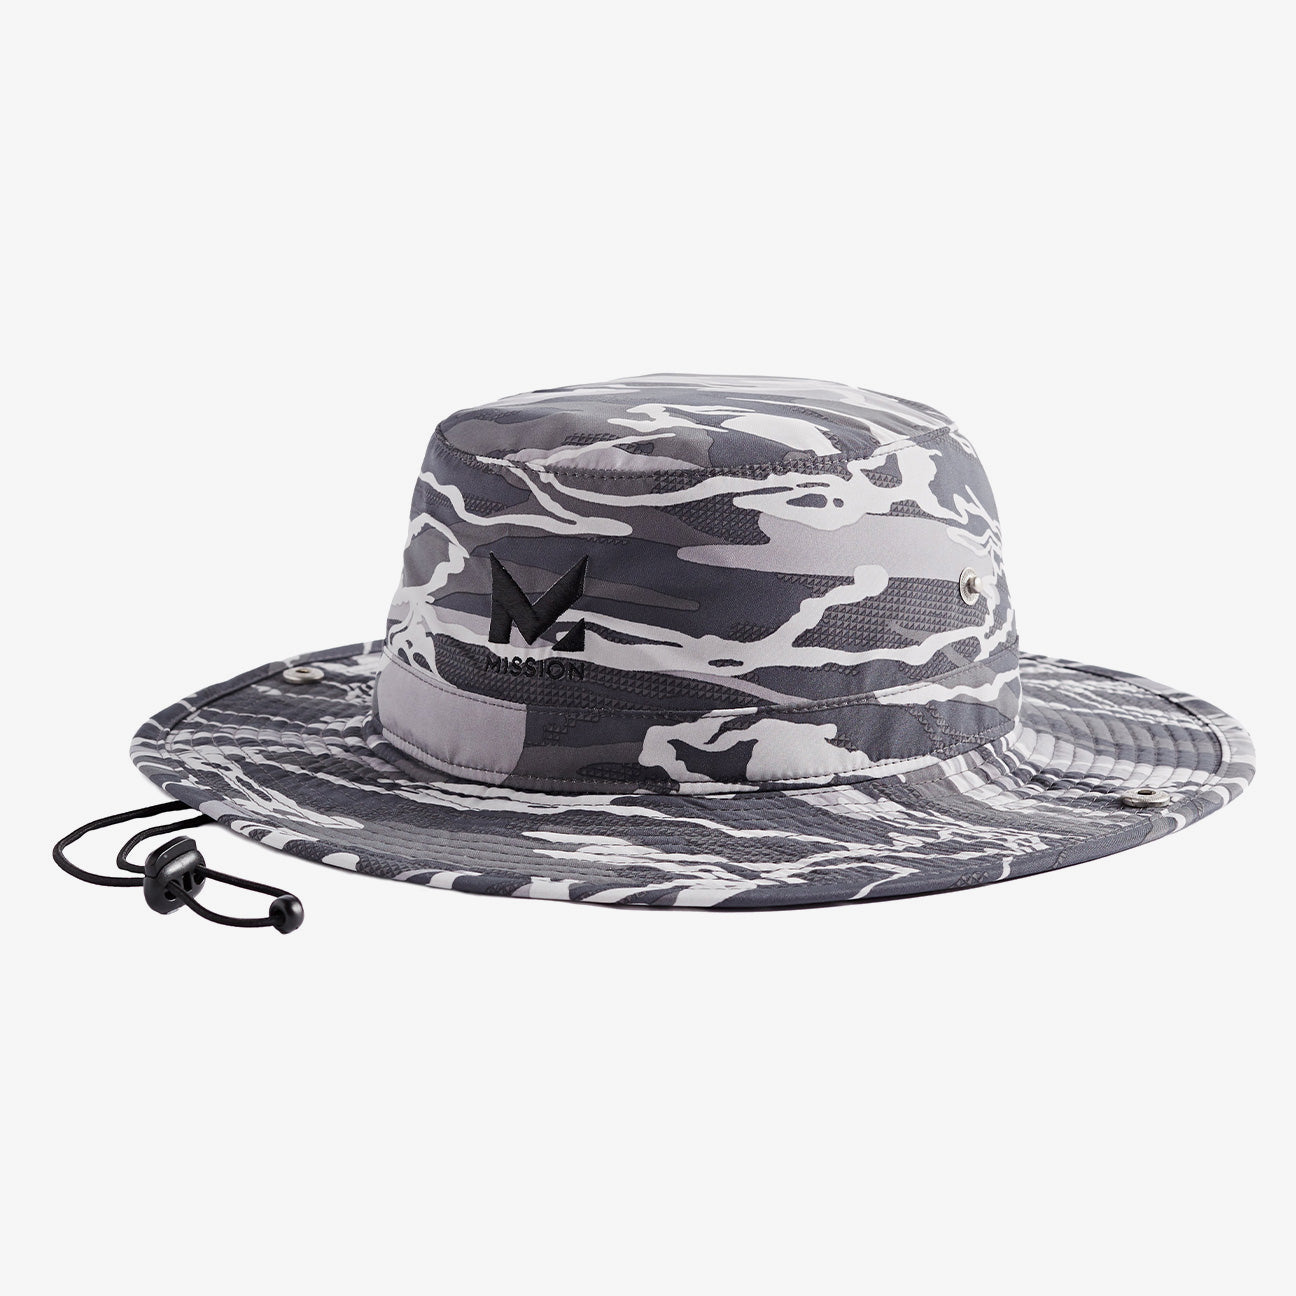 Cooling Bucket Hat Wide Brim Hats MISSION One Size Matrix Camo Silver 